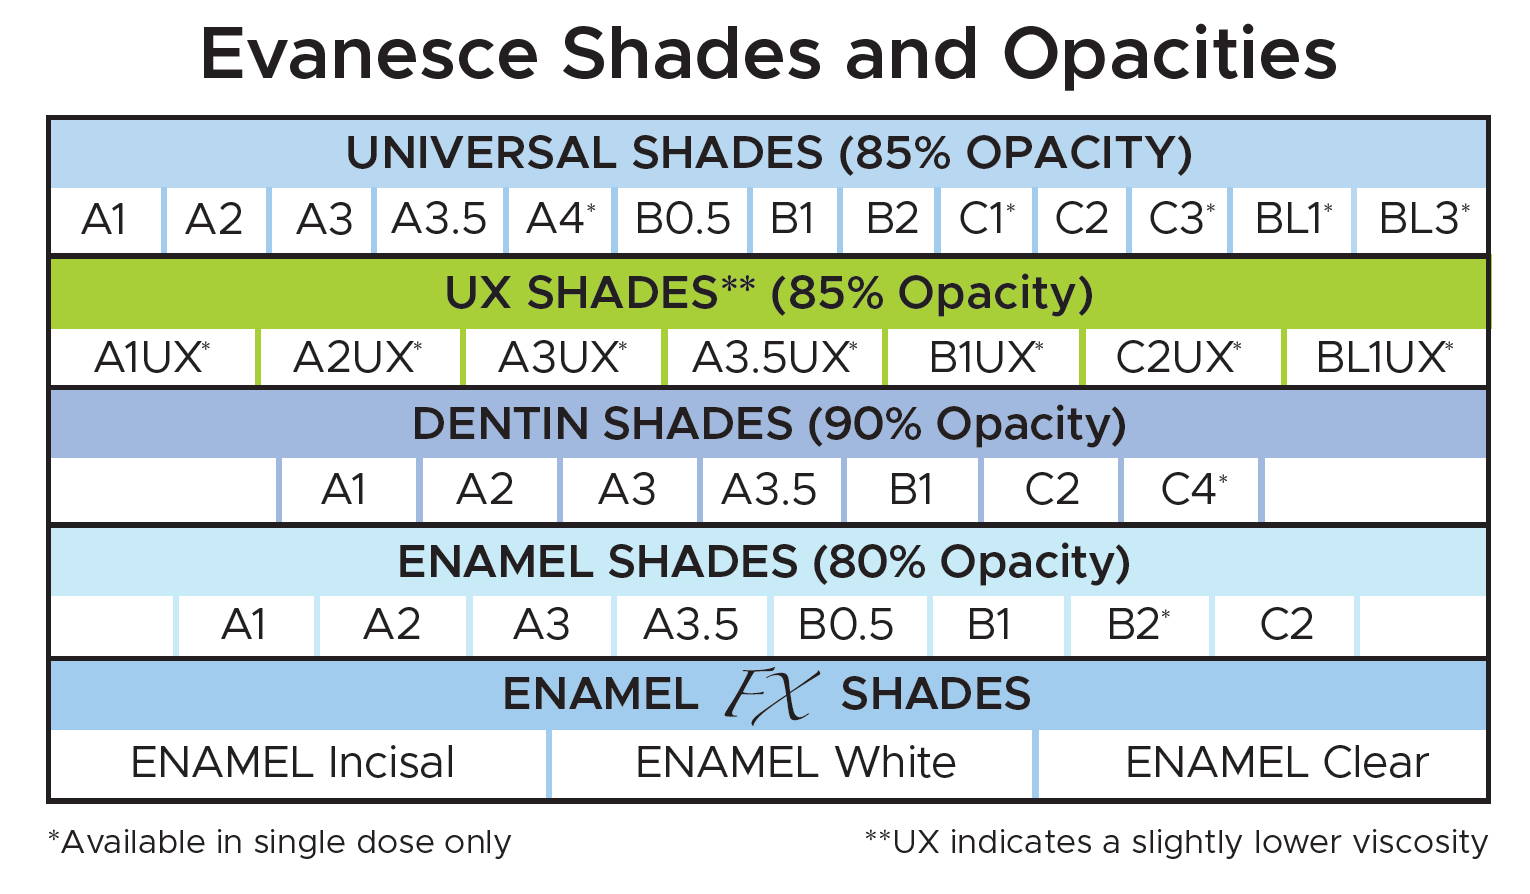 Table of Evanesce shades and opacities